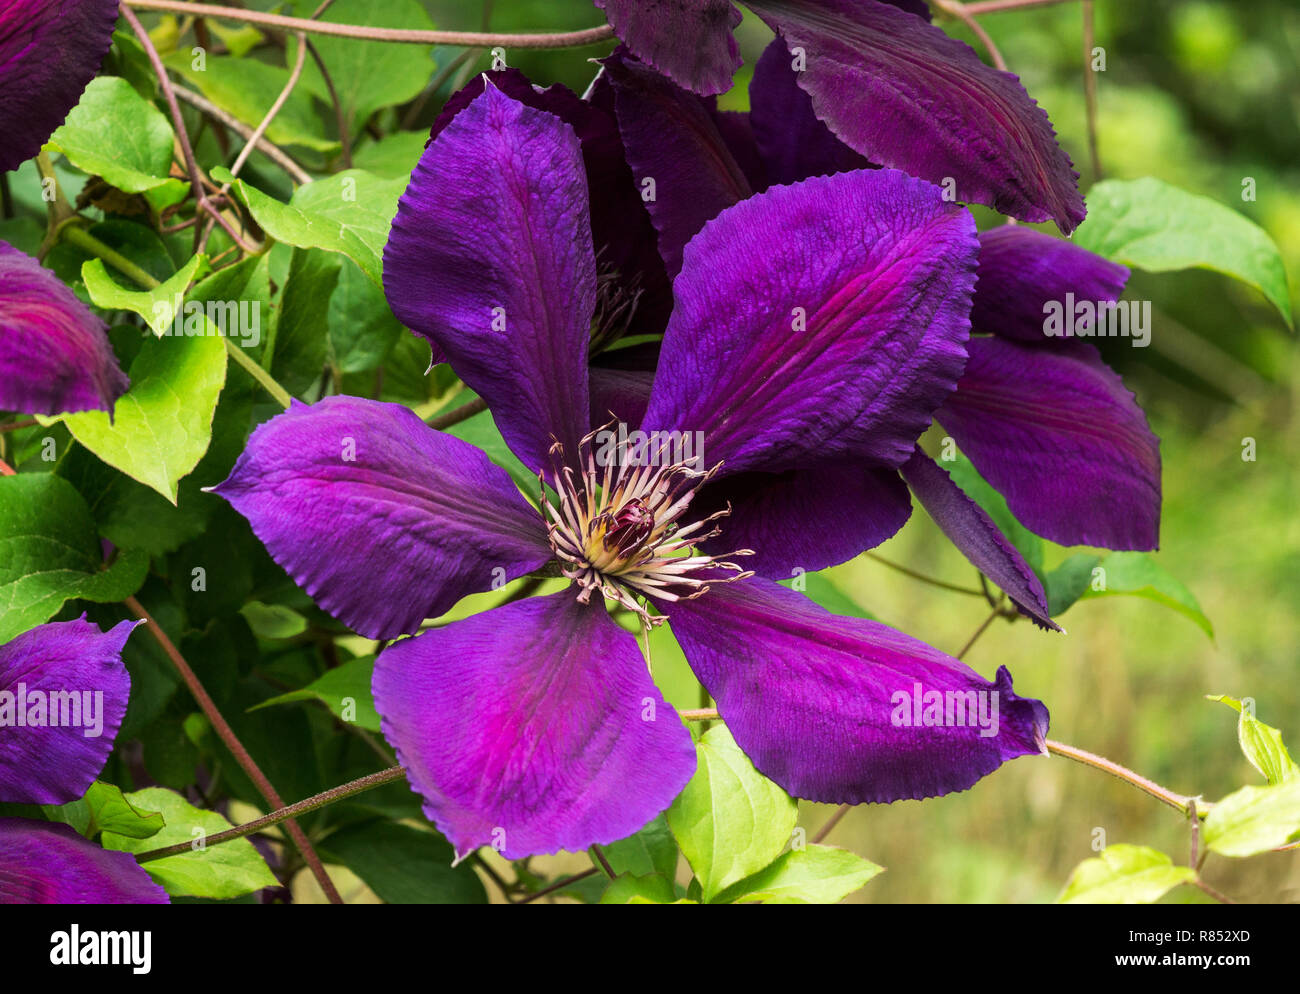 Flower of the deciduous Clematis hybrid cv. Clematis x Jackmanii Superba. A typical single type large flowered clematis. Stock Photo